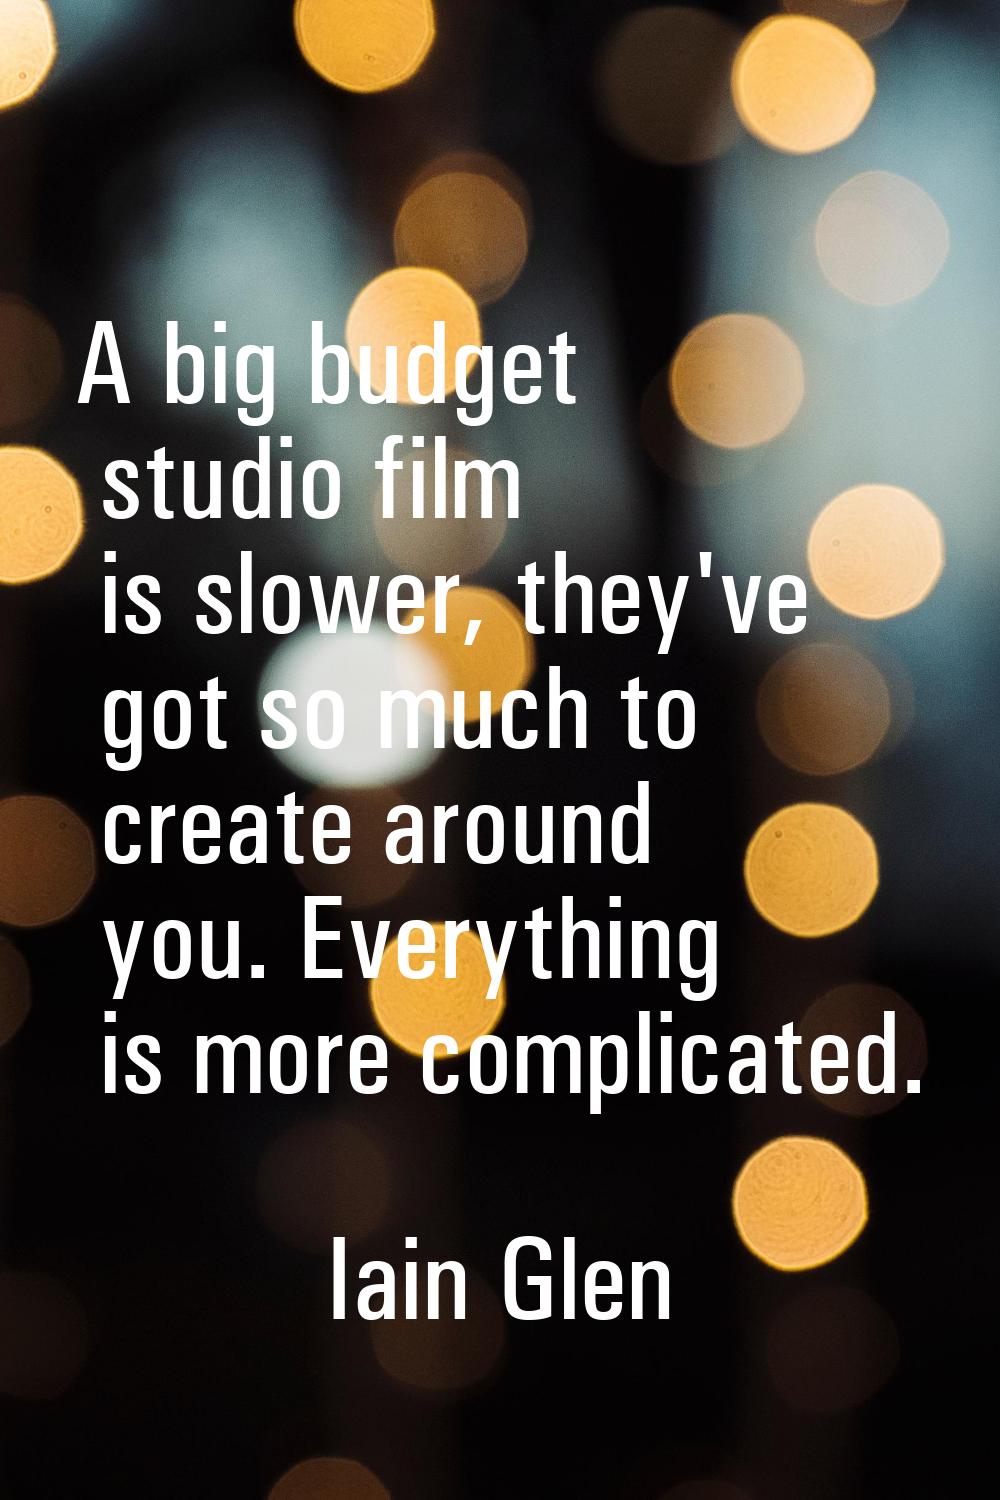 A big budget studio film is slower, they've got so much to create around you. Everything is more co